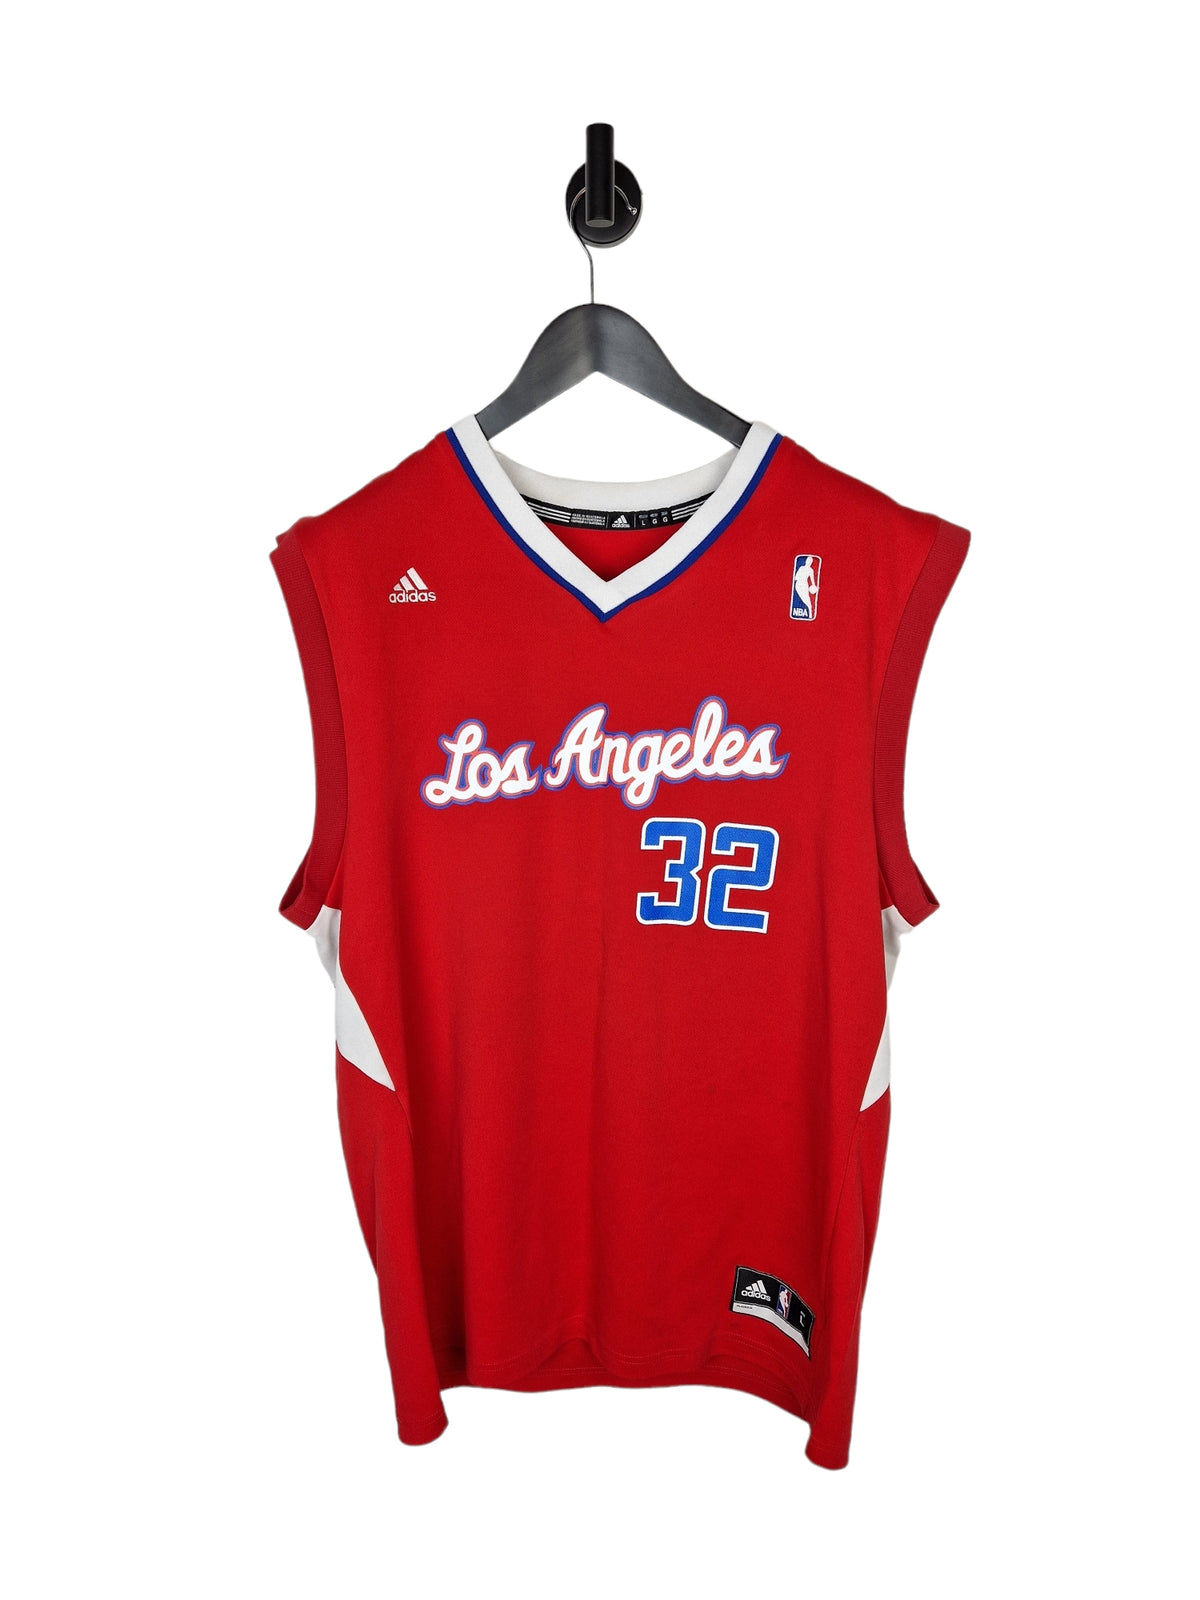 Adidas Los Angeles Clippers Griffin 23 Basketball Jersey - Size Large